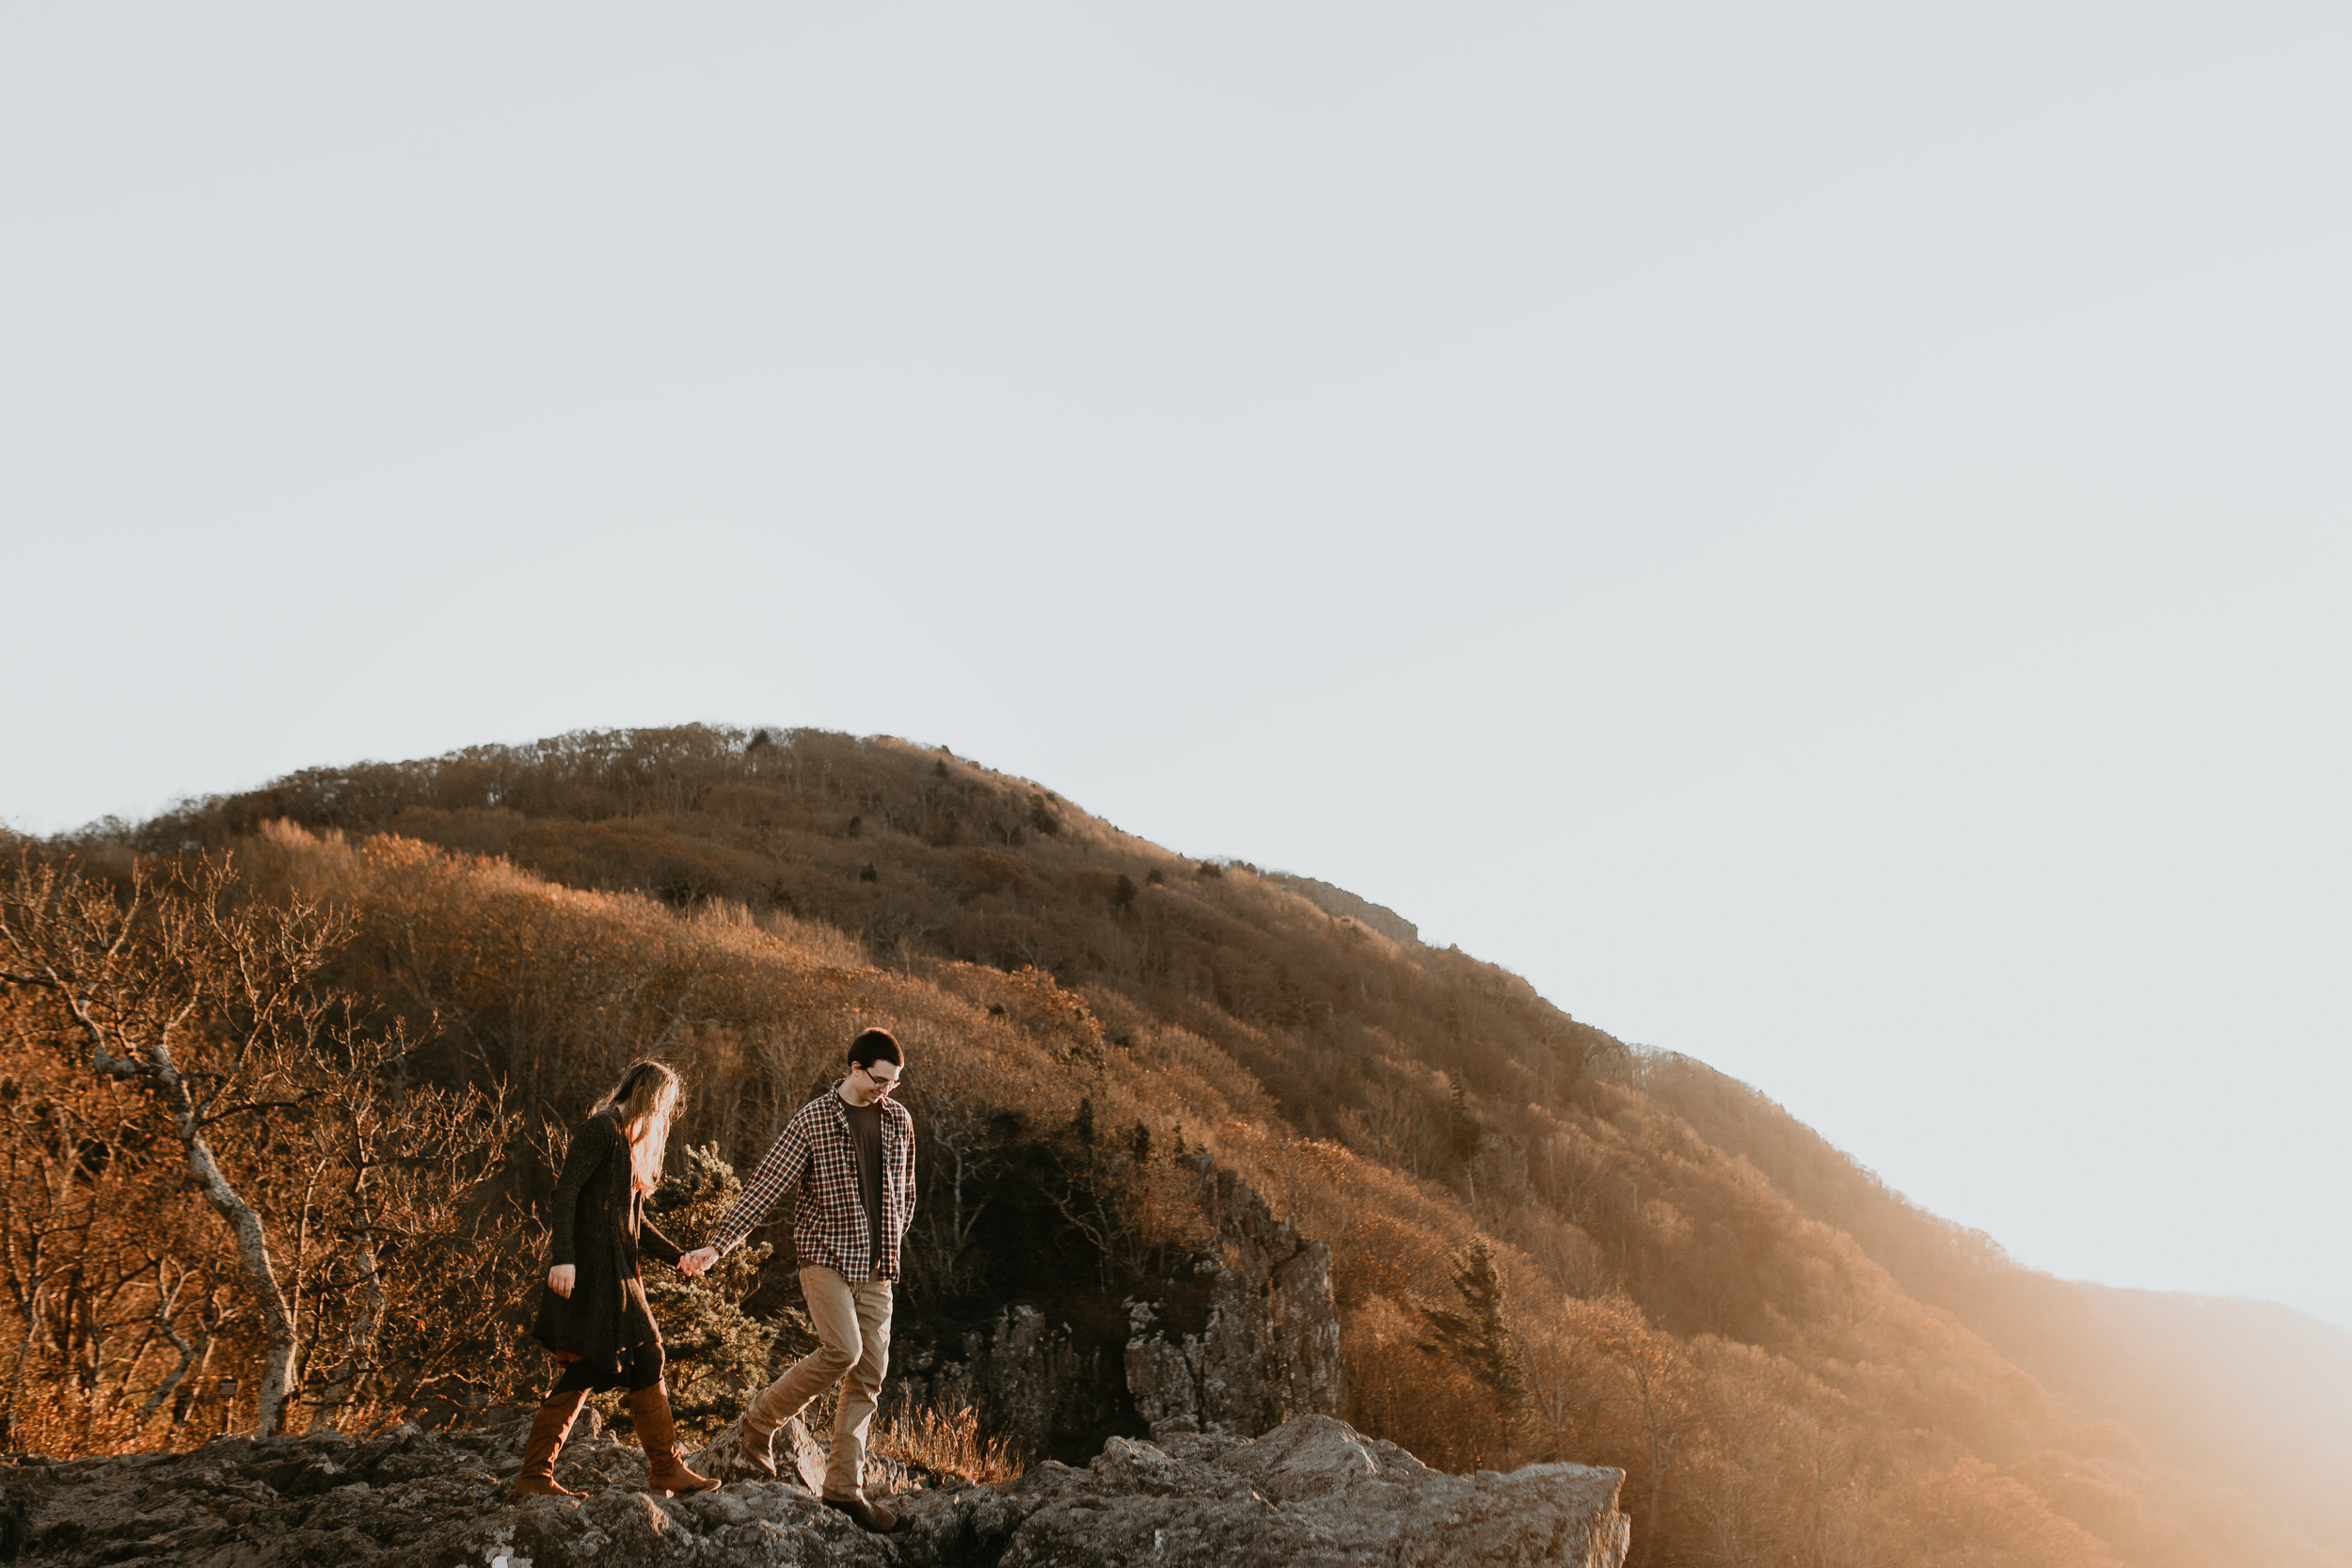 nicole-daacke-photography-shenandoah-national-park-adventure-engagement-session-with-fall-foliage-shenandoah-elopement-photographer-engagement-photos-in-virginia-charlottesville-national-park-adventure-elopement-photographer-3900.jpg